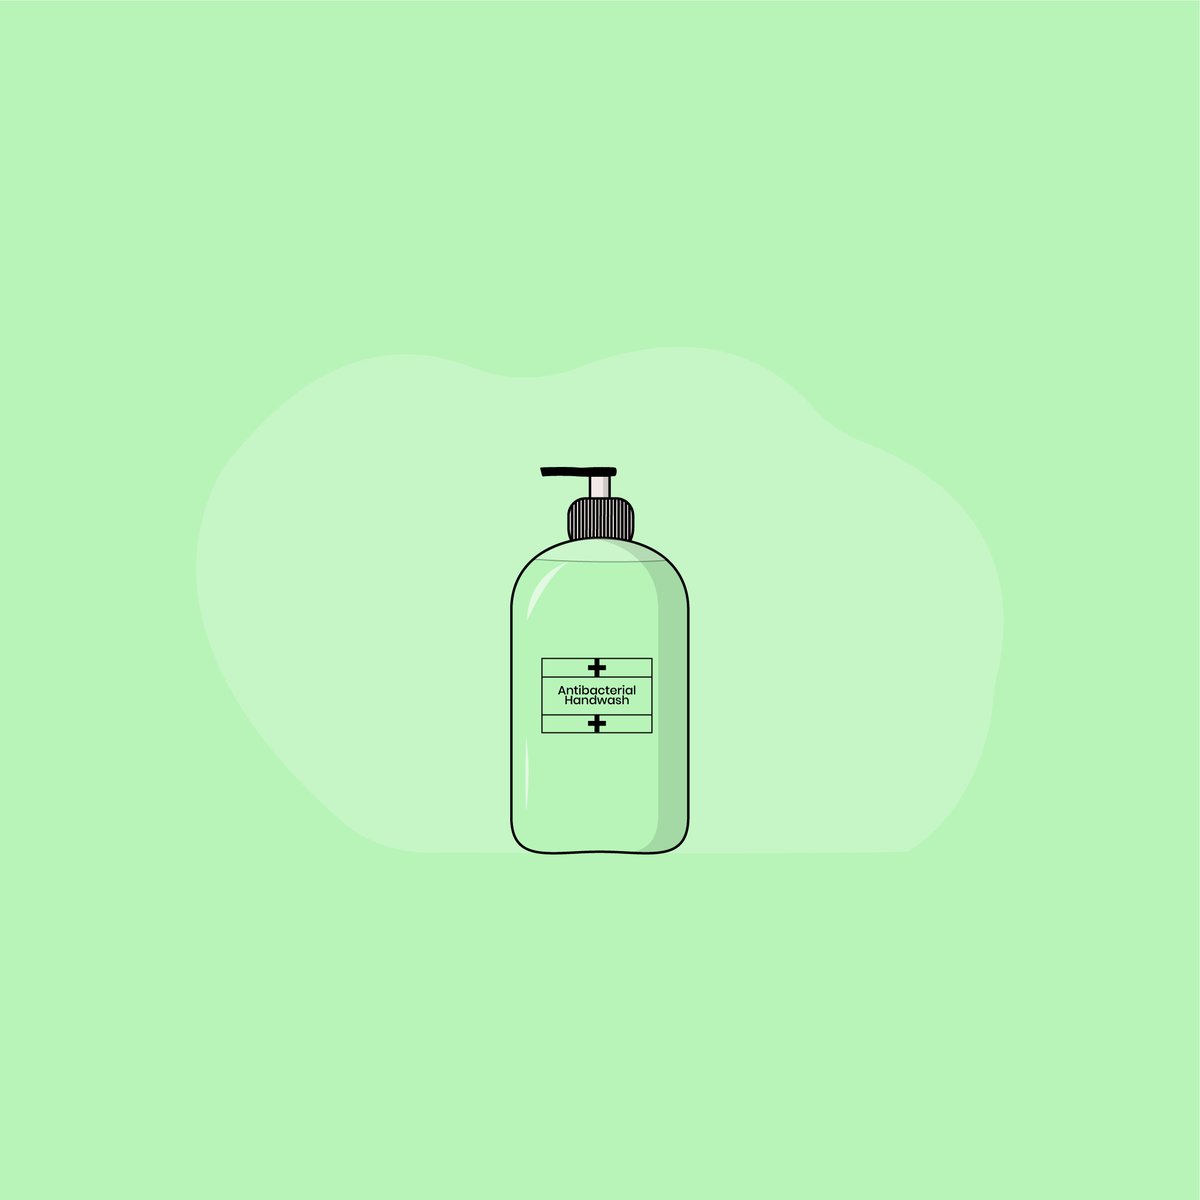 Don't forget to wash your hands.Stay safe guys. #illustrator #illustration #COVID19  #handwash